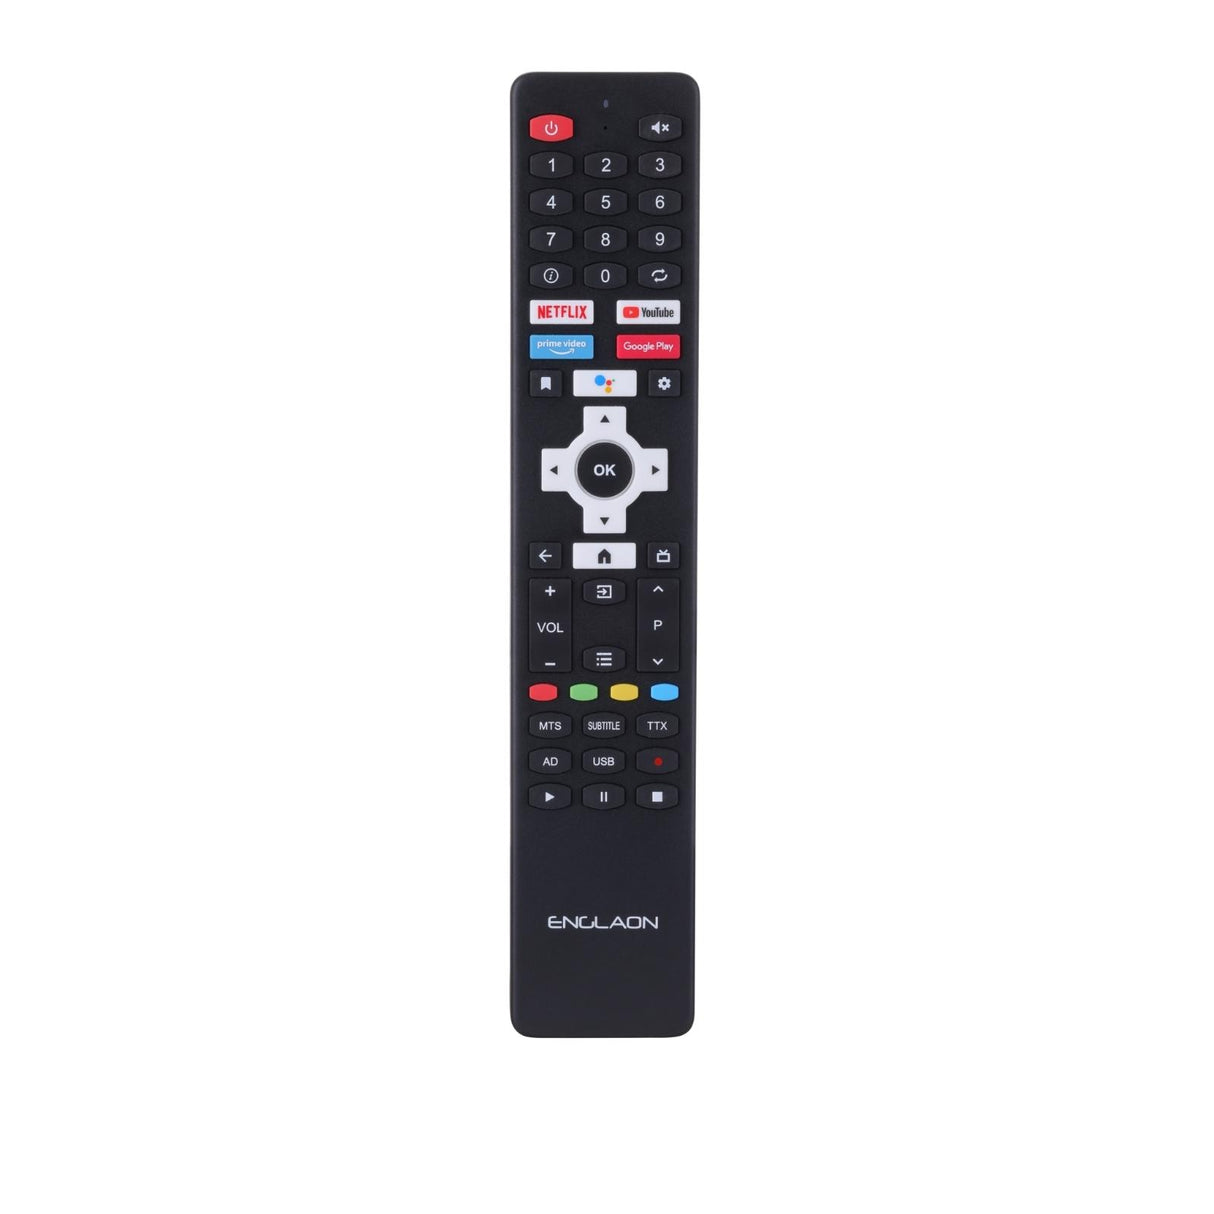 ENGLAON TV remote control for LED TVs (For X70 Series)